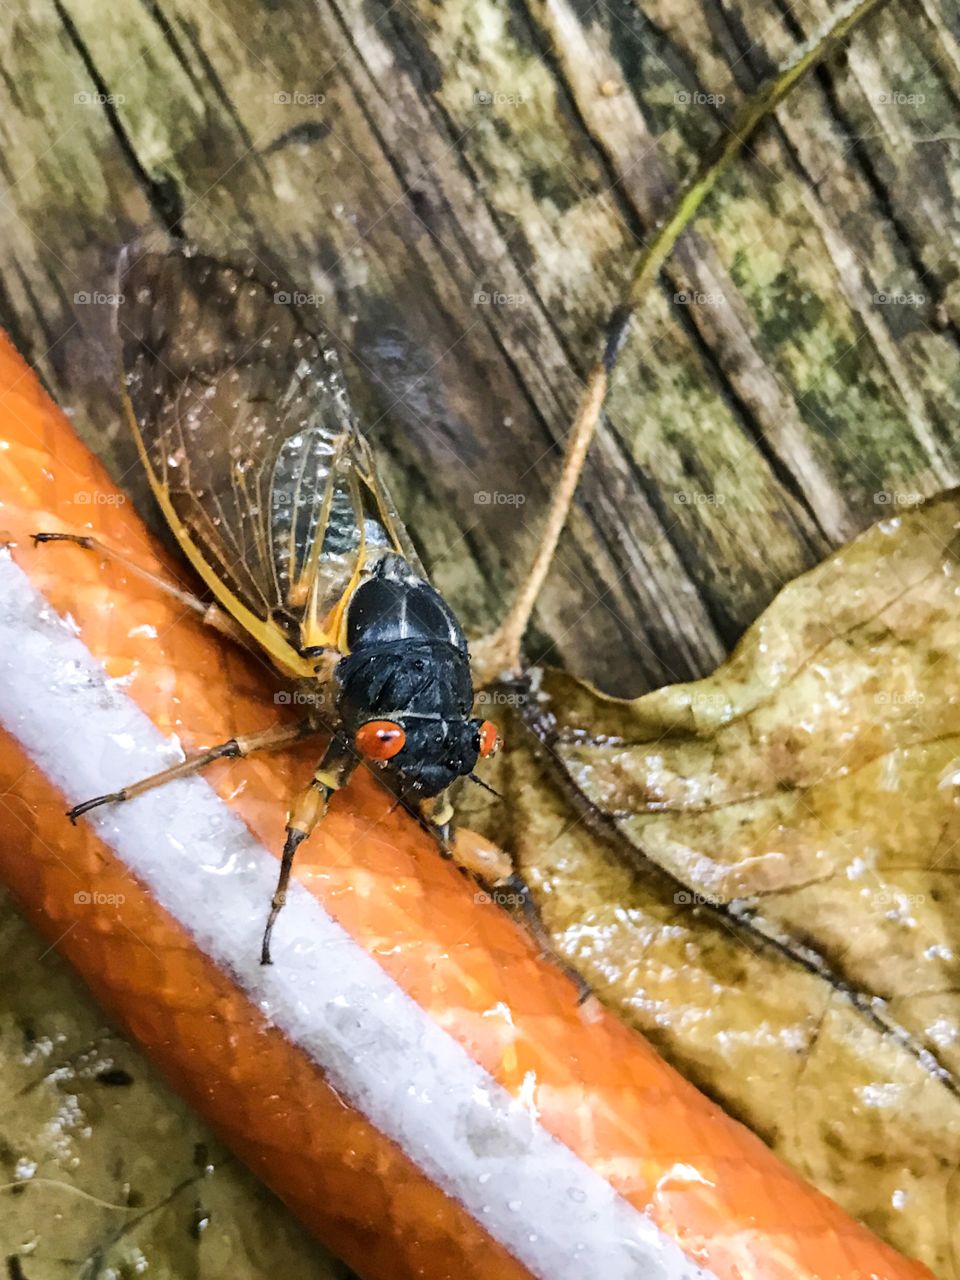 Insect cicada